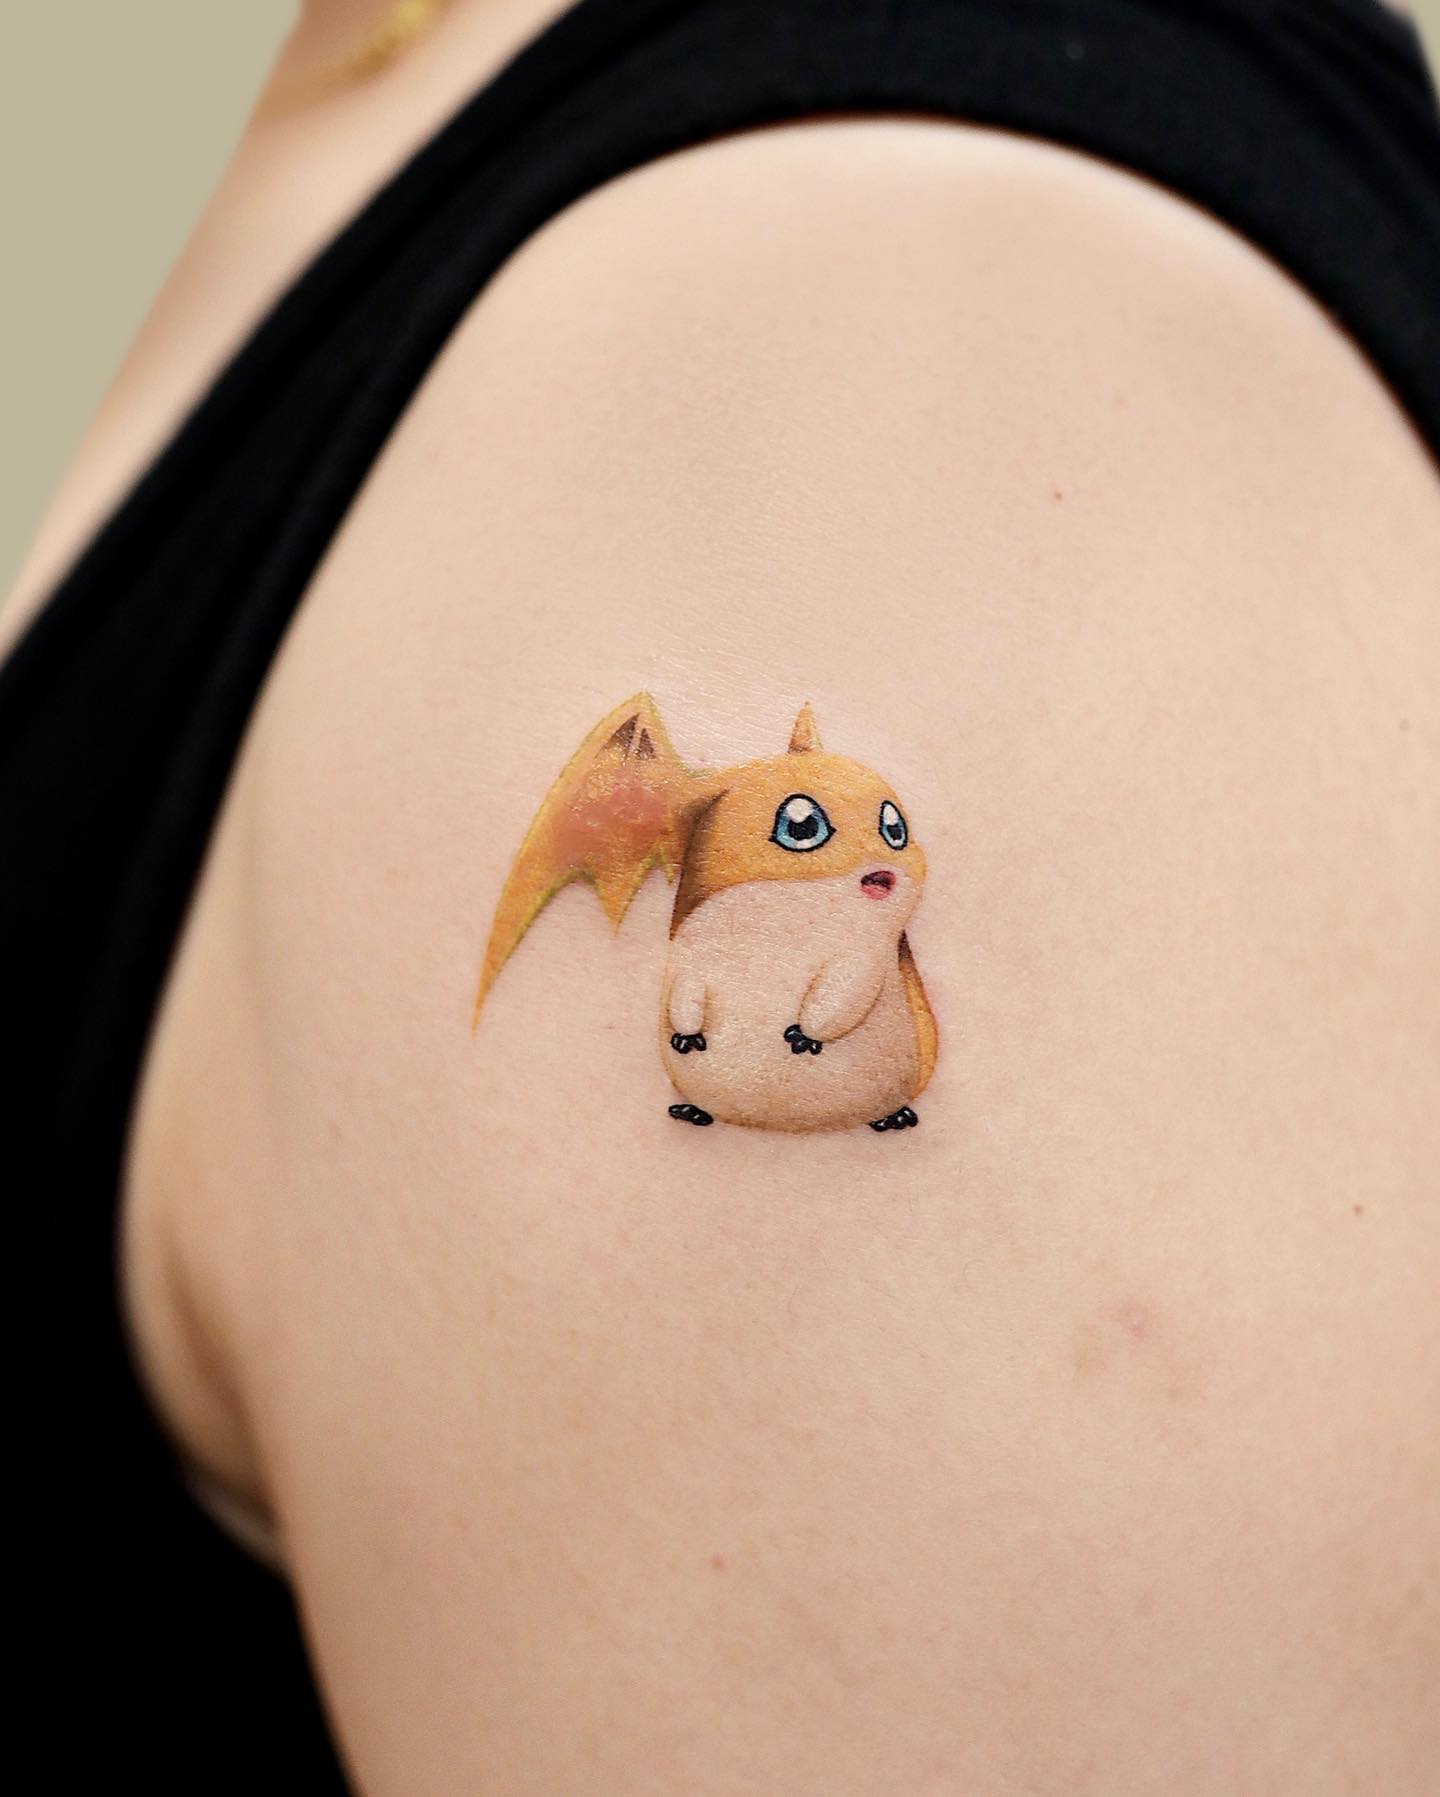 22 Subtle Pokémon Tattoos We Would Totally Get